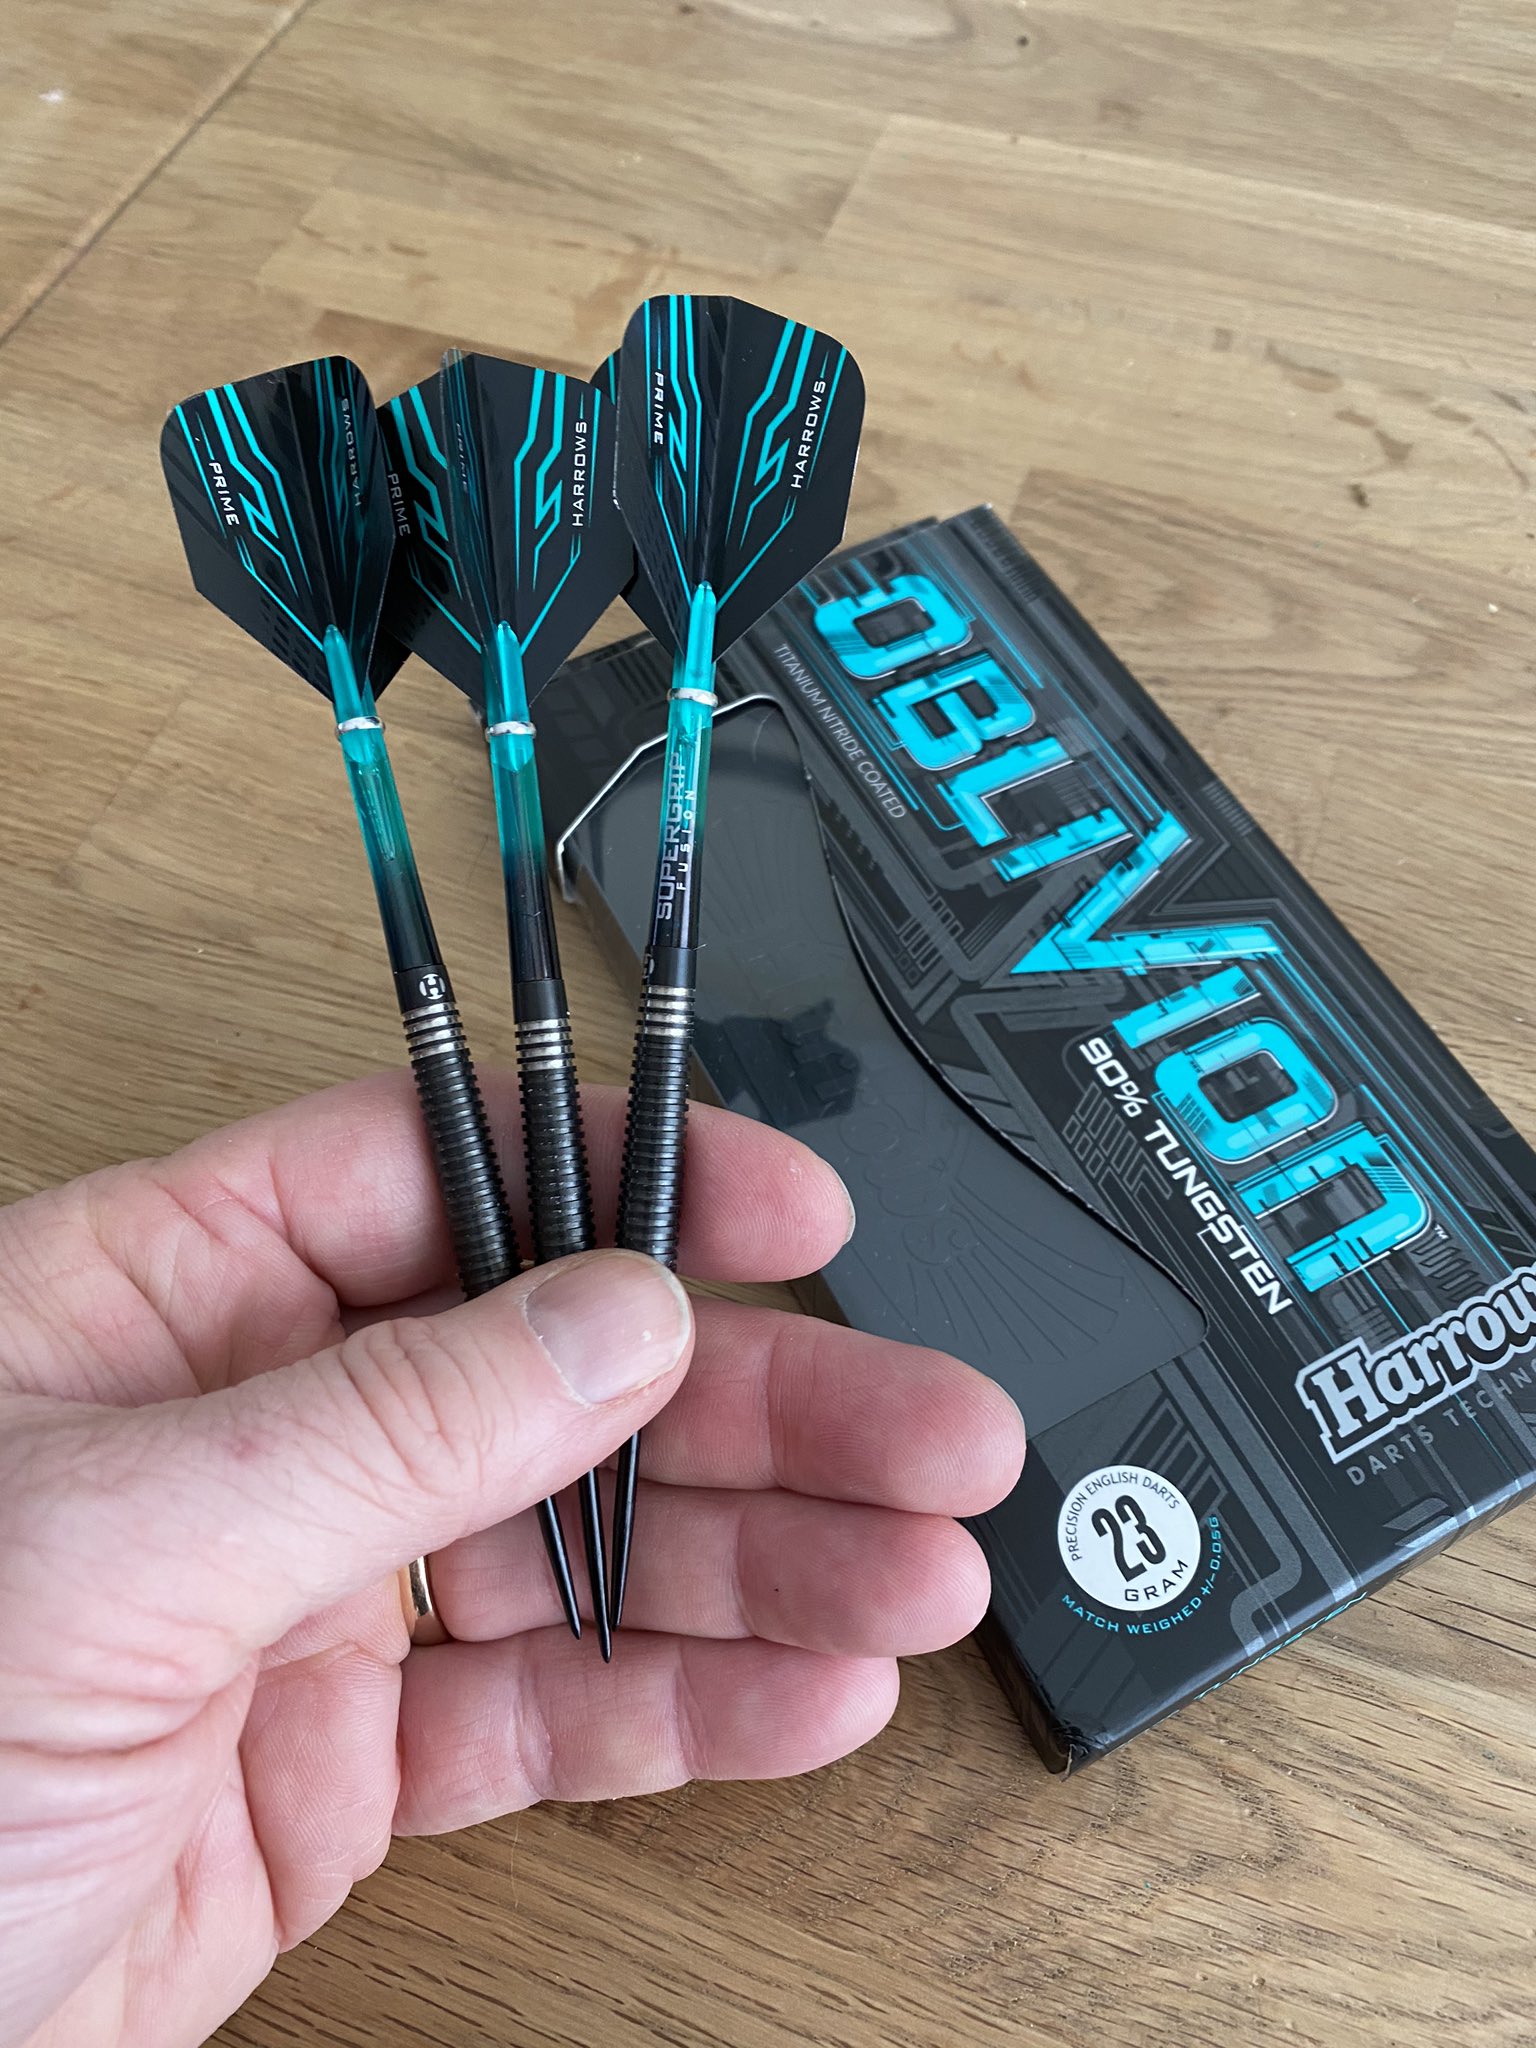 Harrows Darts on Twitter: "@xKG26 Yes, to buy from selected webshops 👍" /